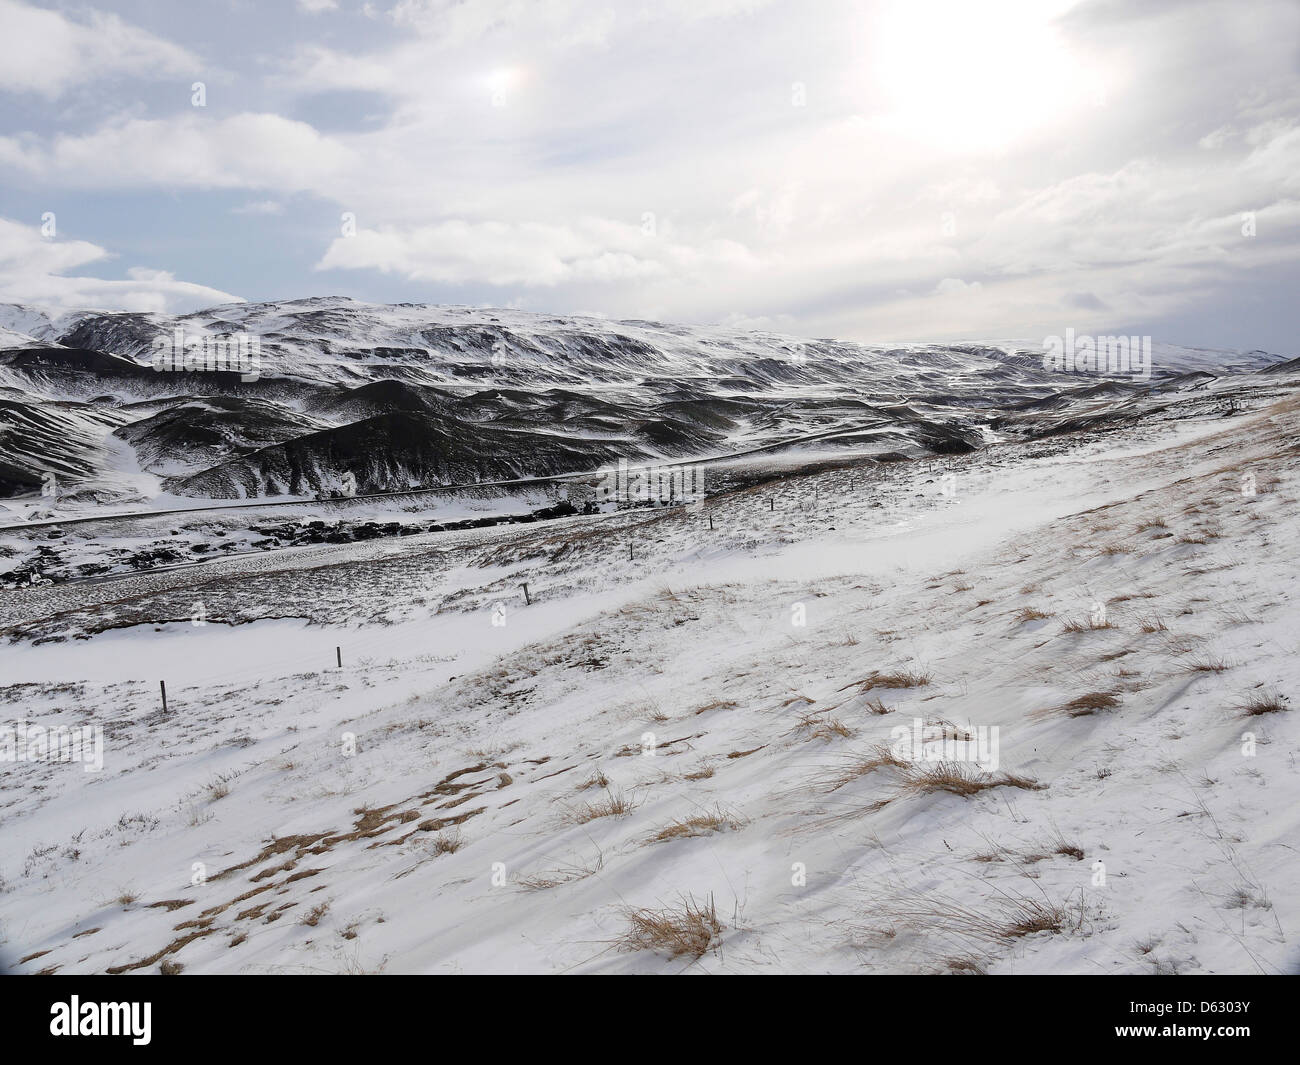 snow-covered vulcanic mountains at the Ringstreet no1,Northern Iceland Stock Photo